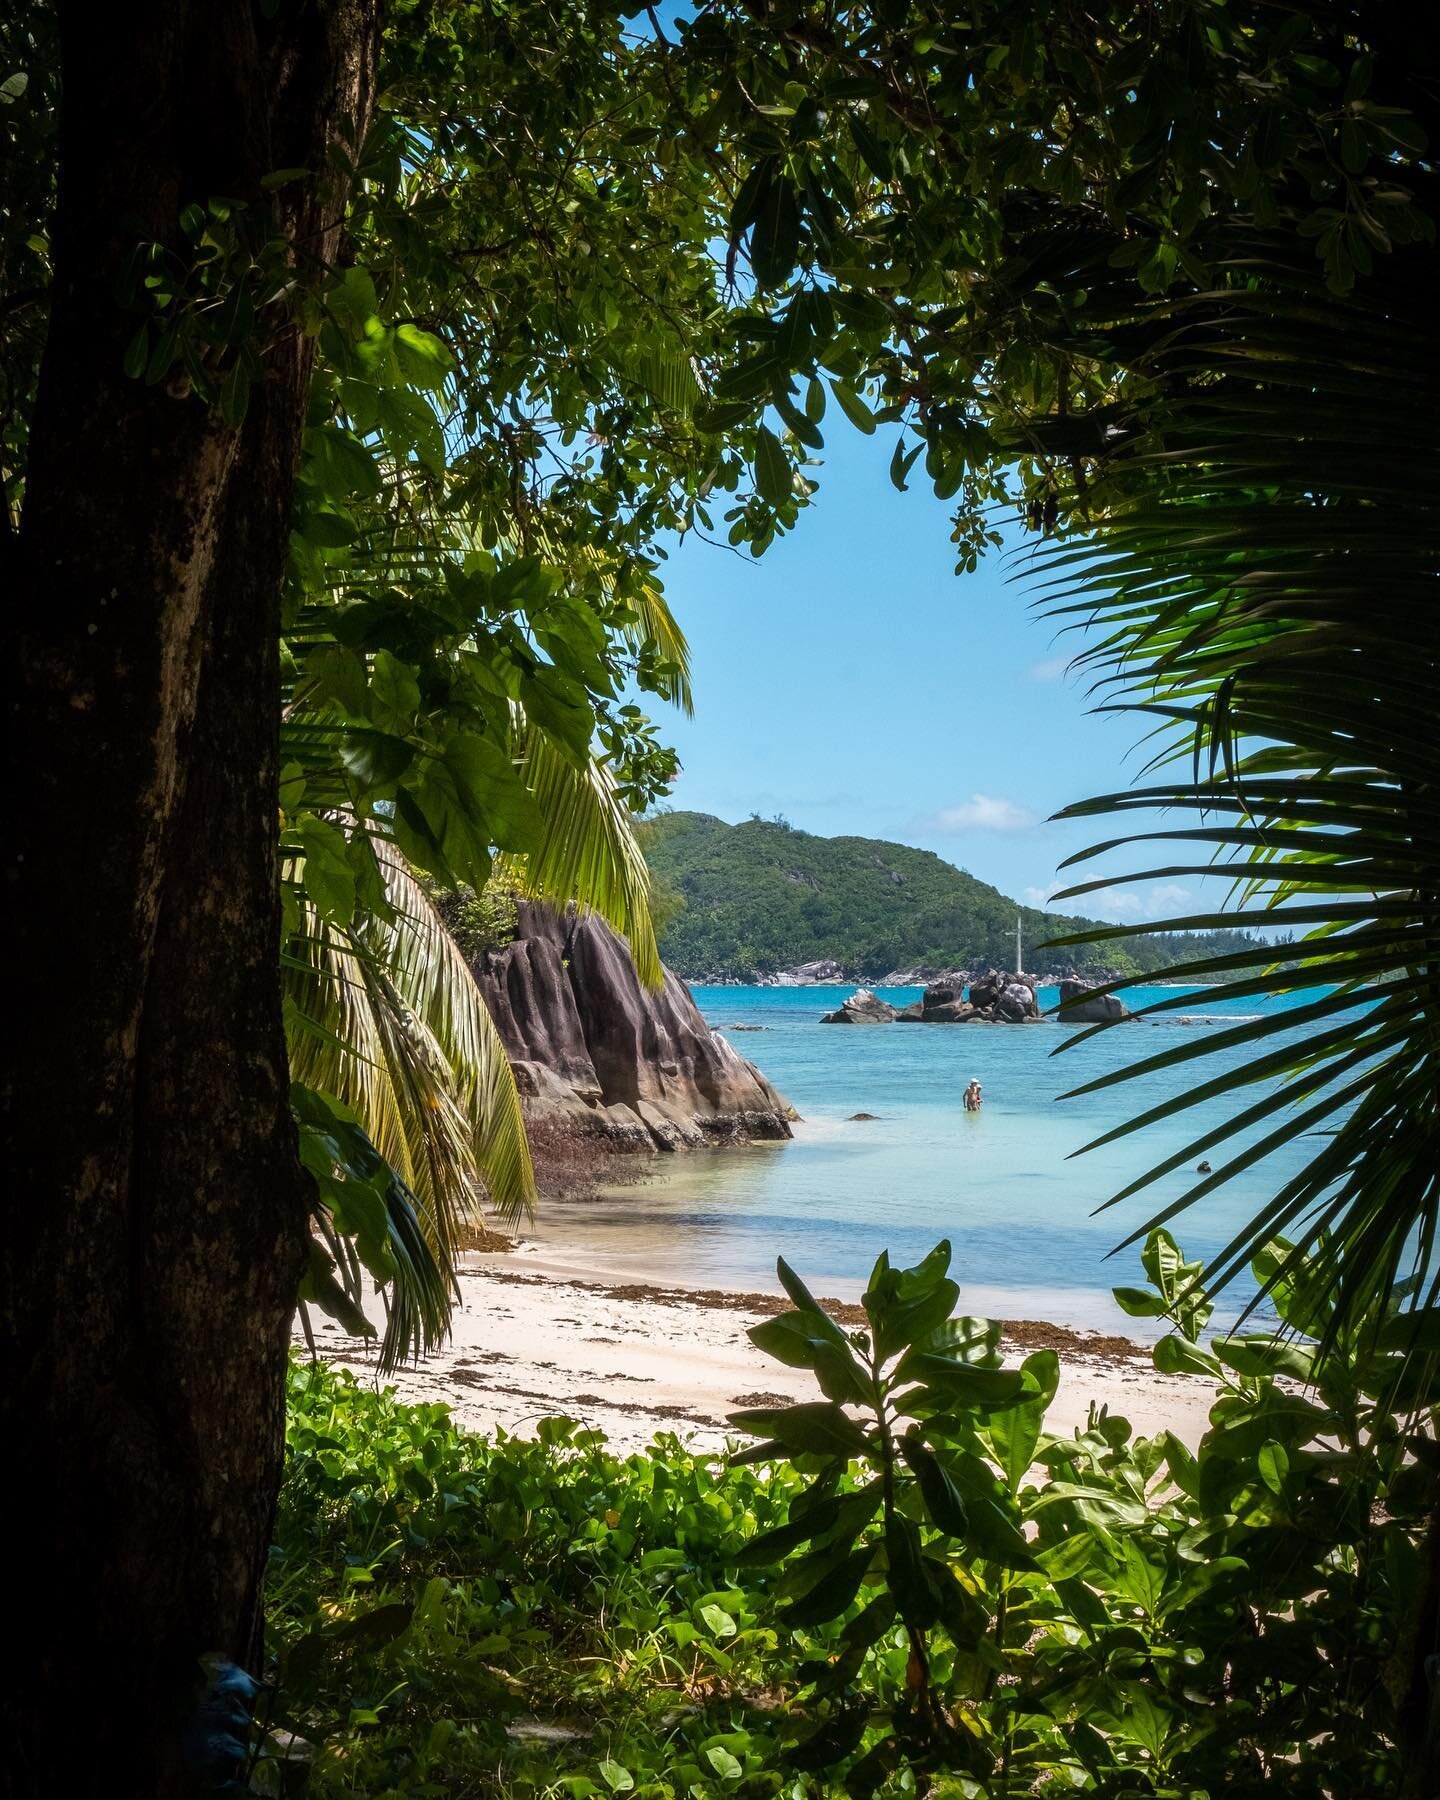 A country so beautiful most scenes look absurdly fake, as if someone asked AI to create an idyllic beach scene framed by dense tropical forests. &ldquo;Now please add paler blue waters, a few more coconut trees, and some otherworldly boulders for goo